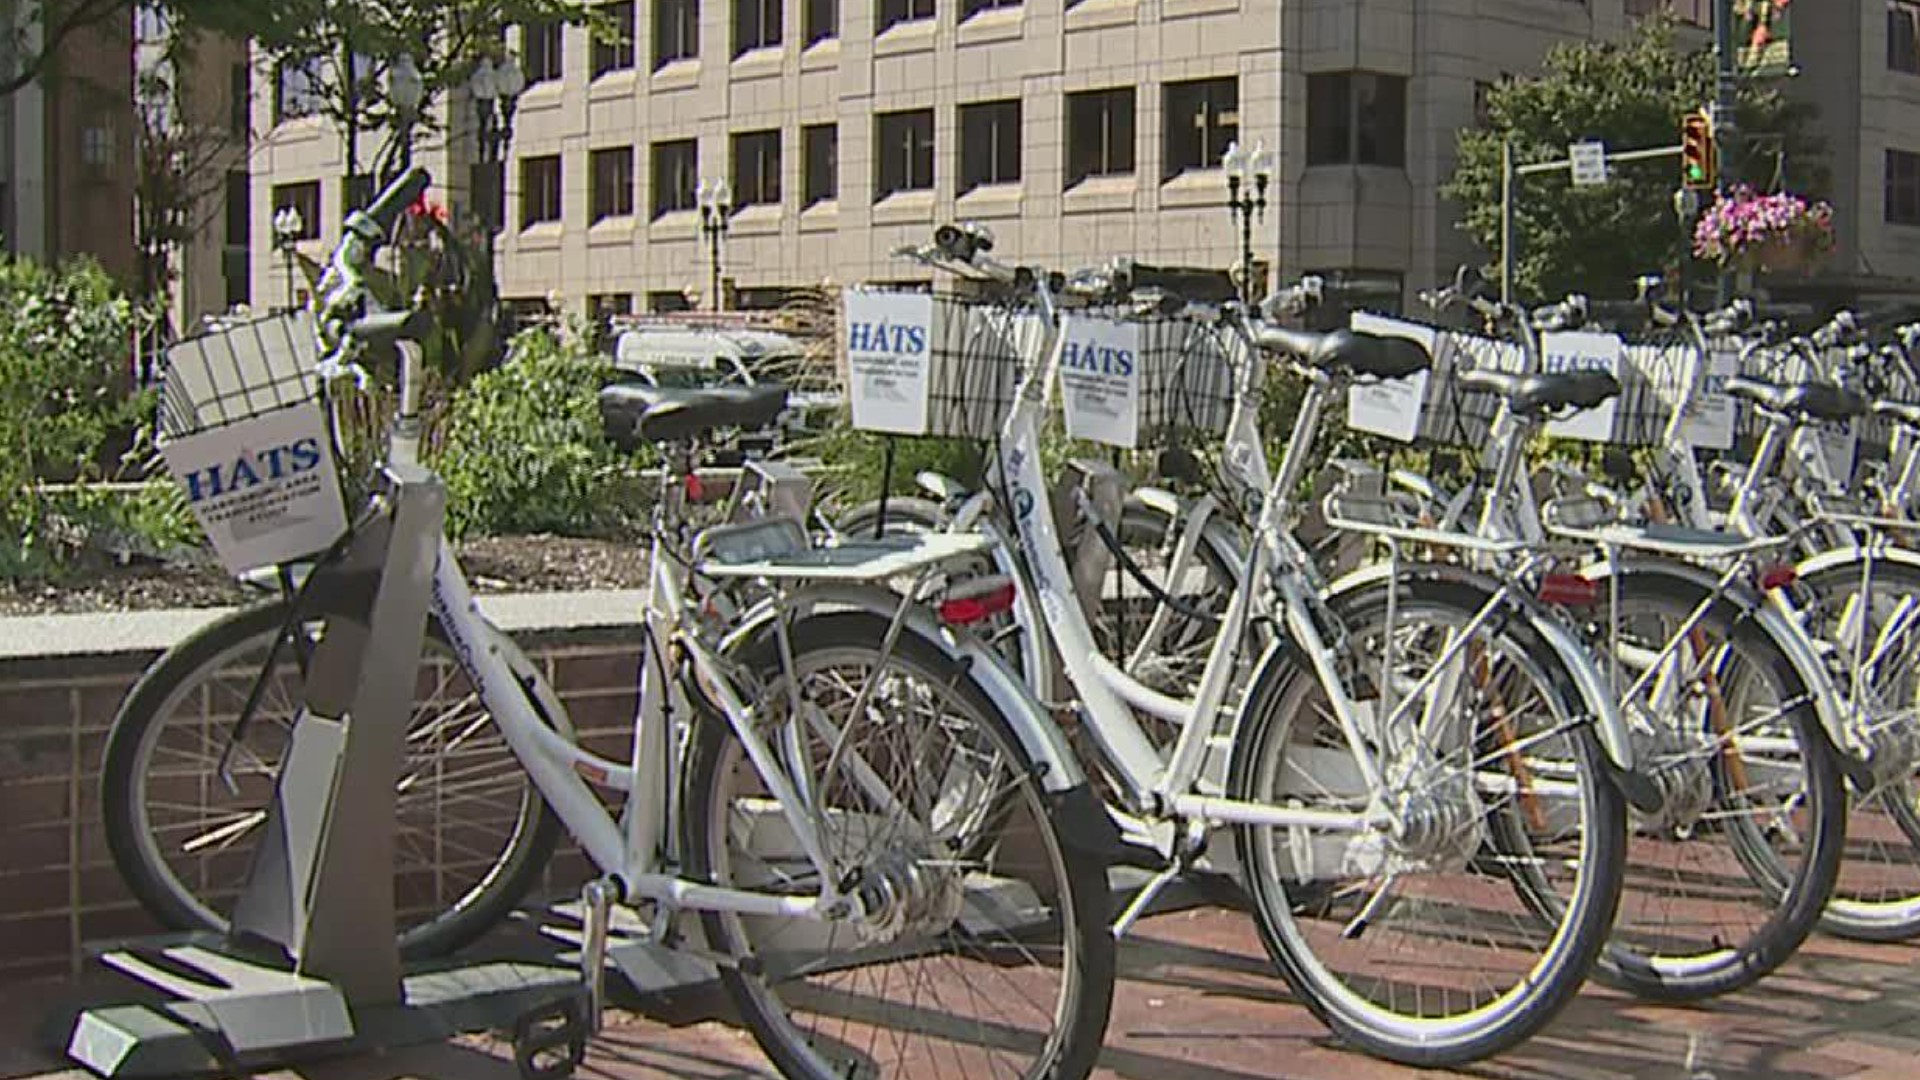 The bikes operate like many other bike share programs, where you can take the bike out for a small fee and return it to any other station across the city.